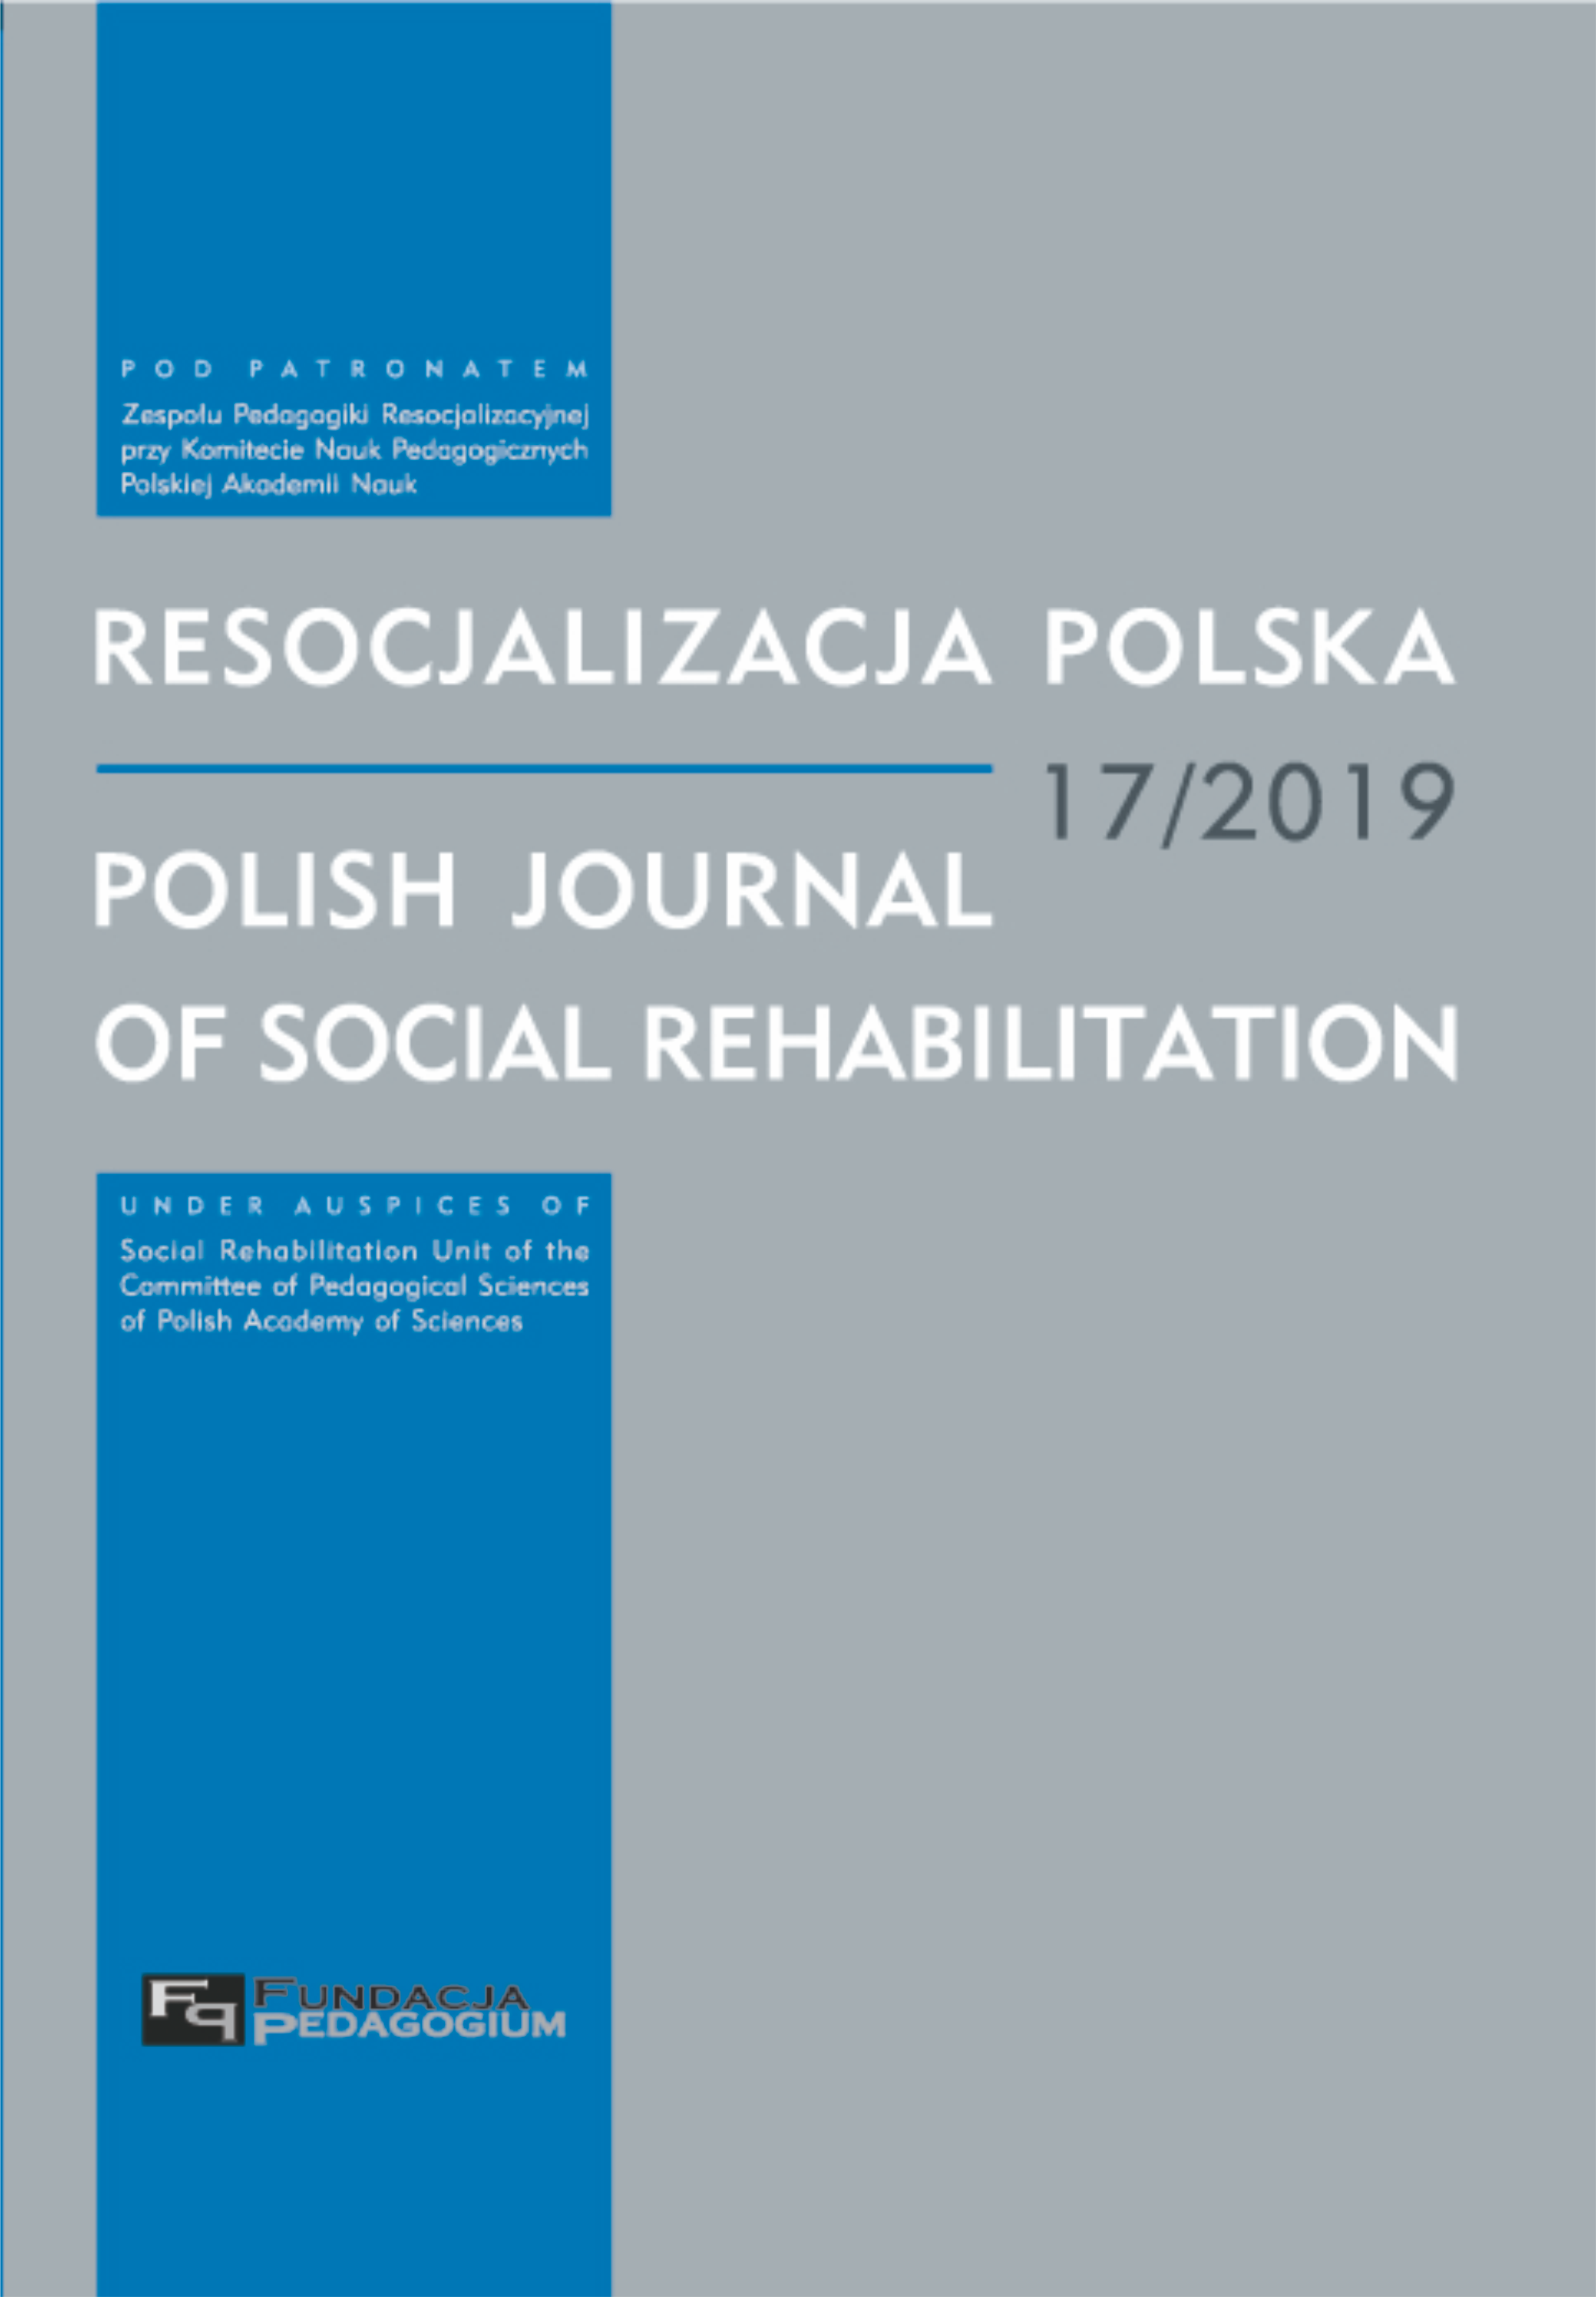 Diagnosis of social dysfunctions or individual
potentials in the work of a probation officer